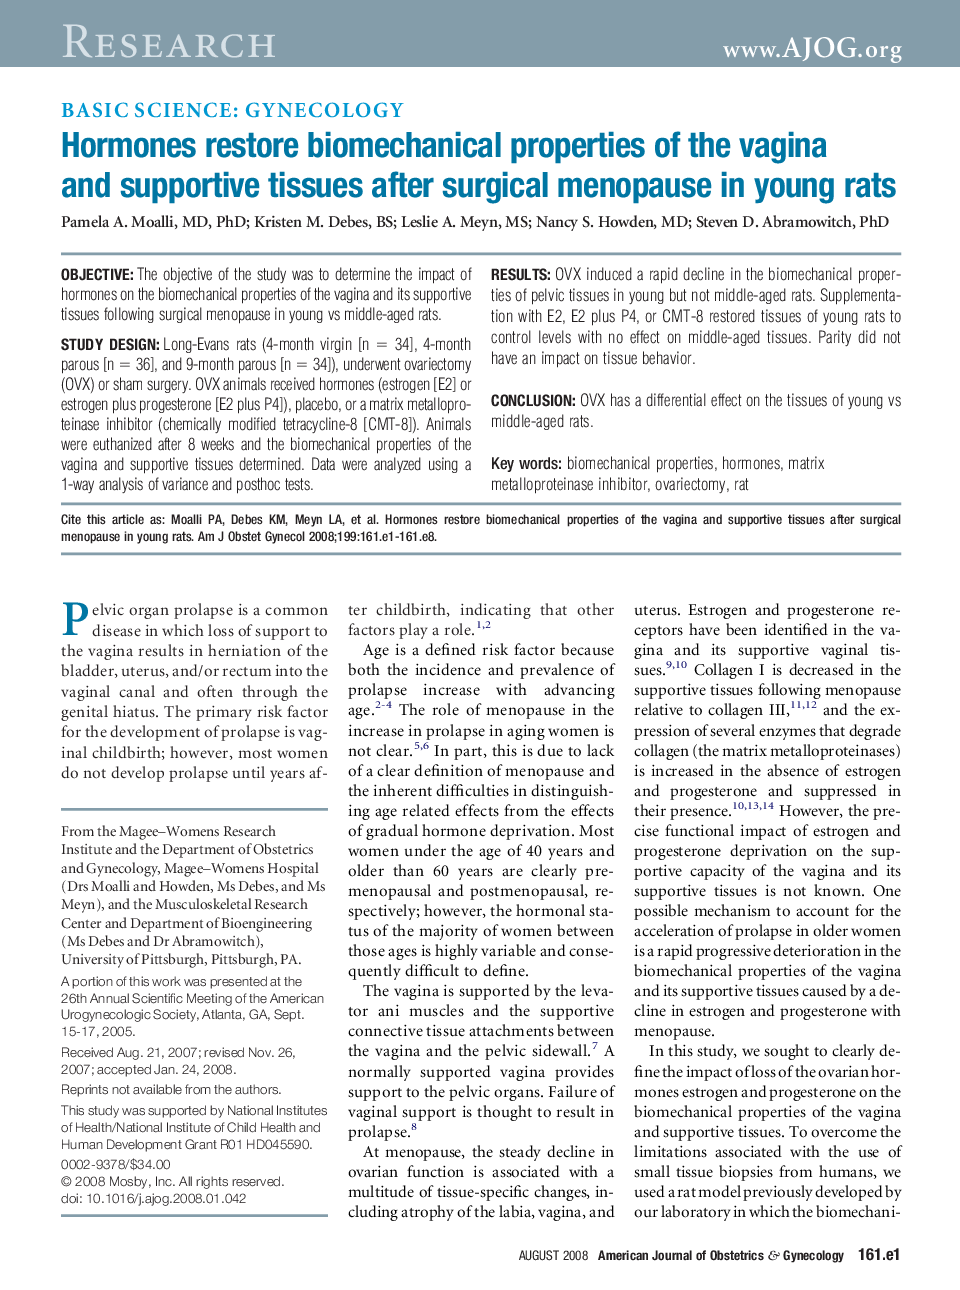 Hormones restore biomechanical properties of the vagina and supportive tissues after surgical menopause in young rats